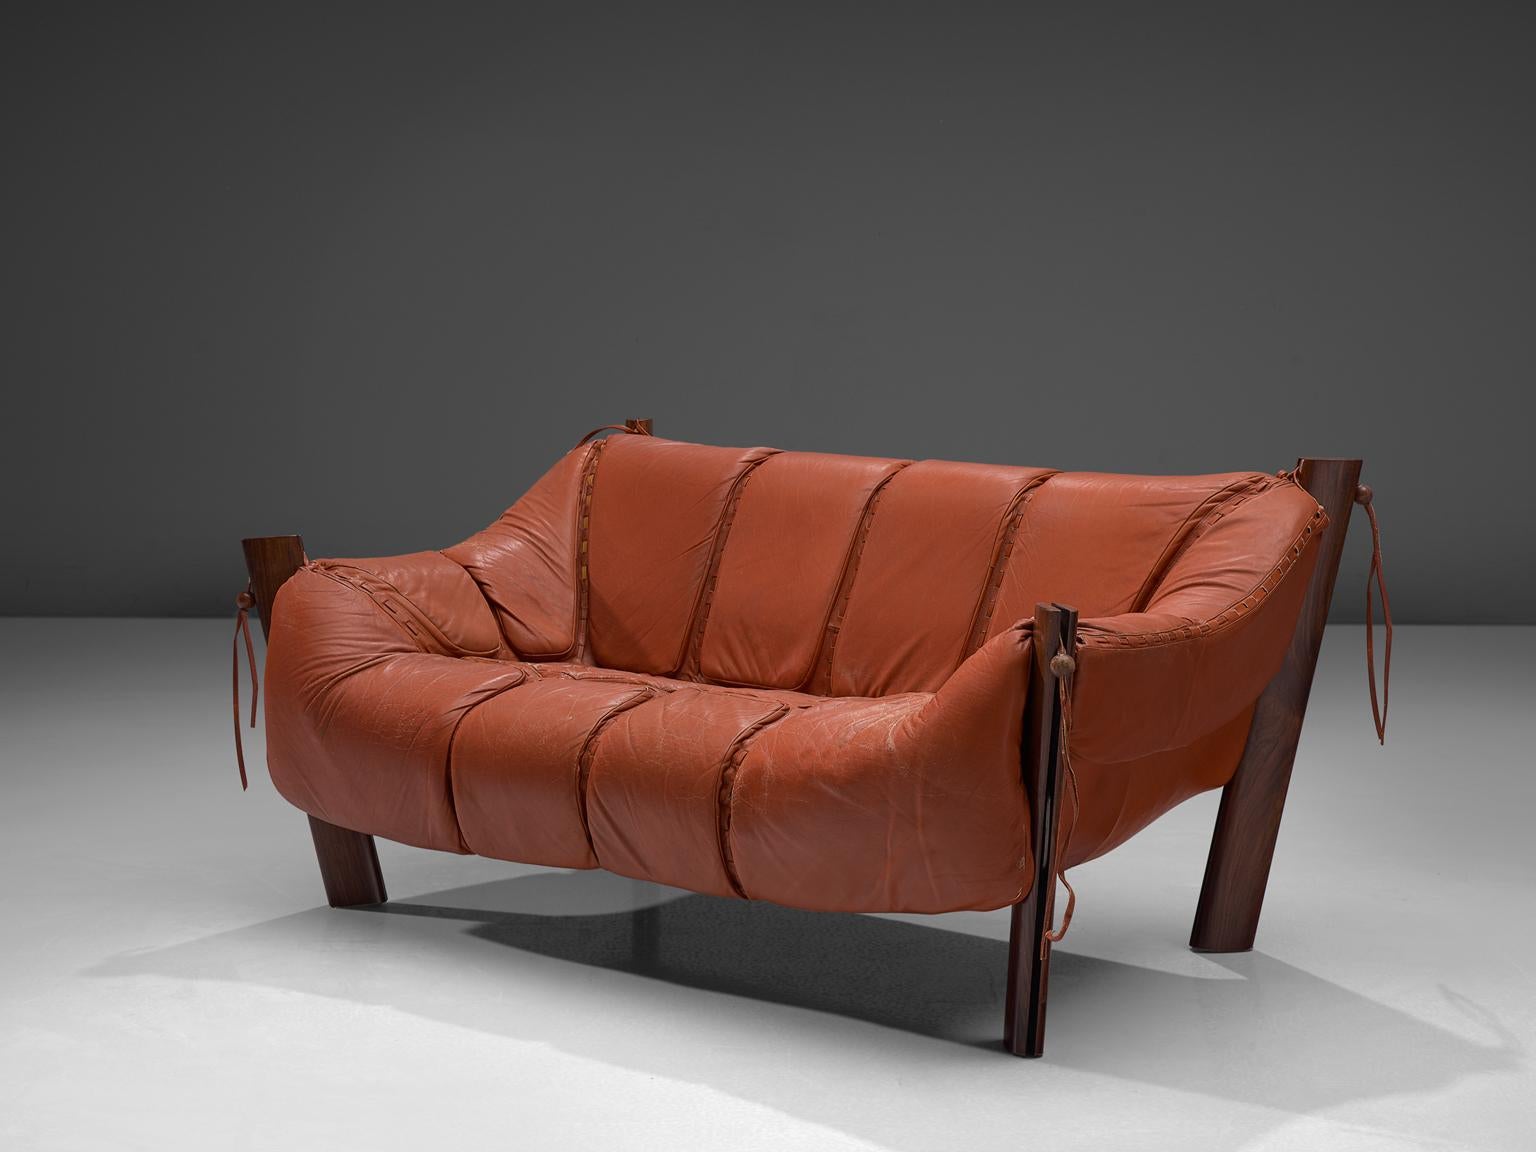 Percival Lafer Two-Seat Sofa in Rosewood and Red Leather im Zustand „Gut“ in Waalwijk, NL